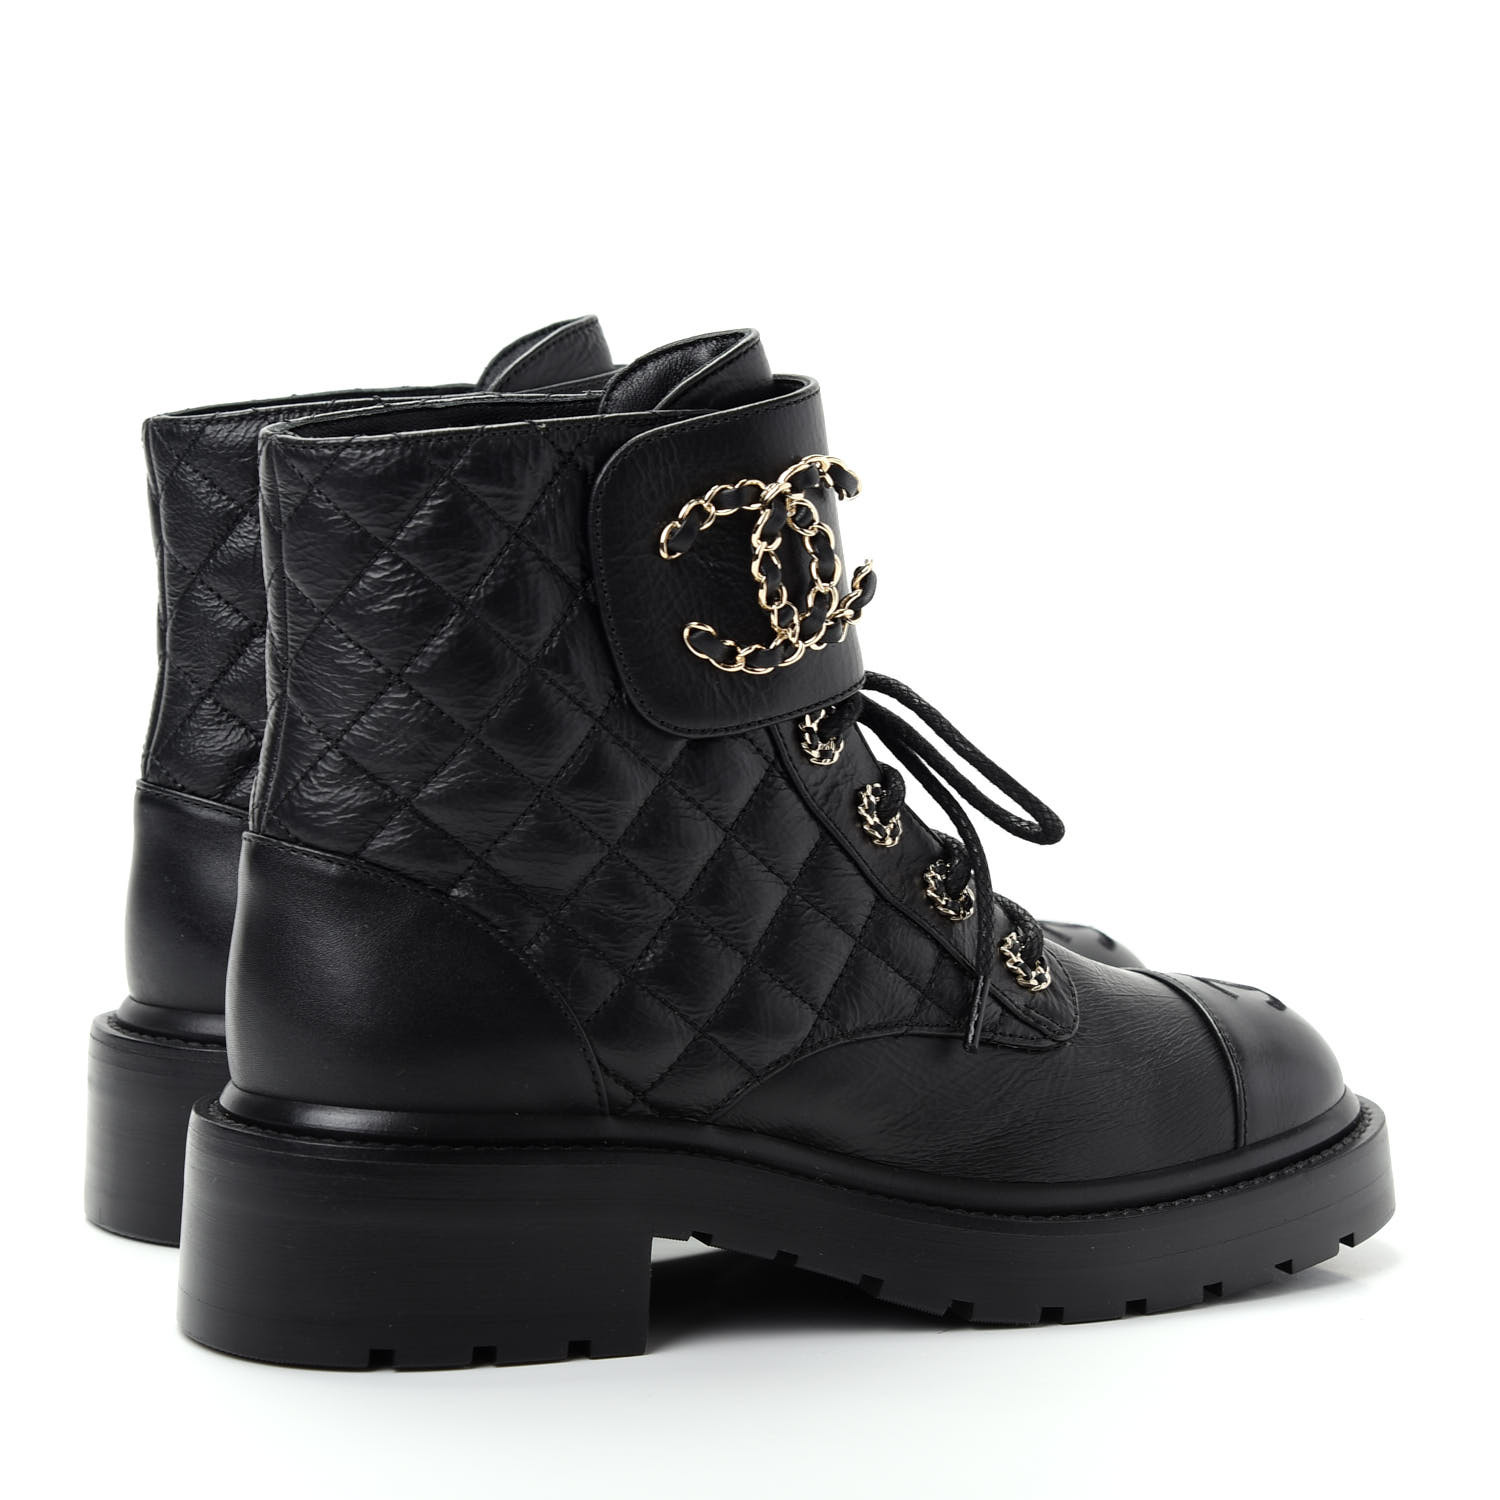 CHANEL Shiny Goatskin Calfskin Quilted Lace Up Combat Boots 37 Black ...